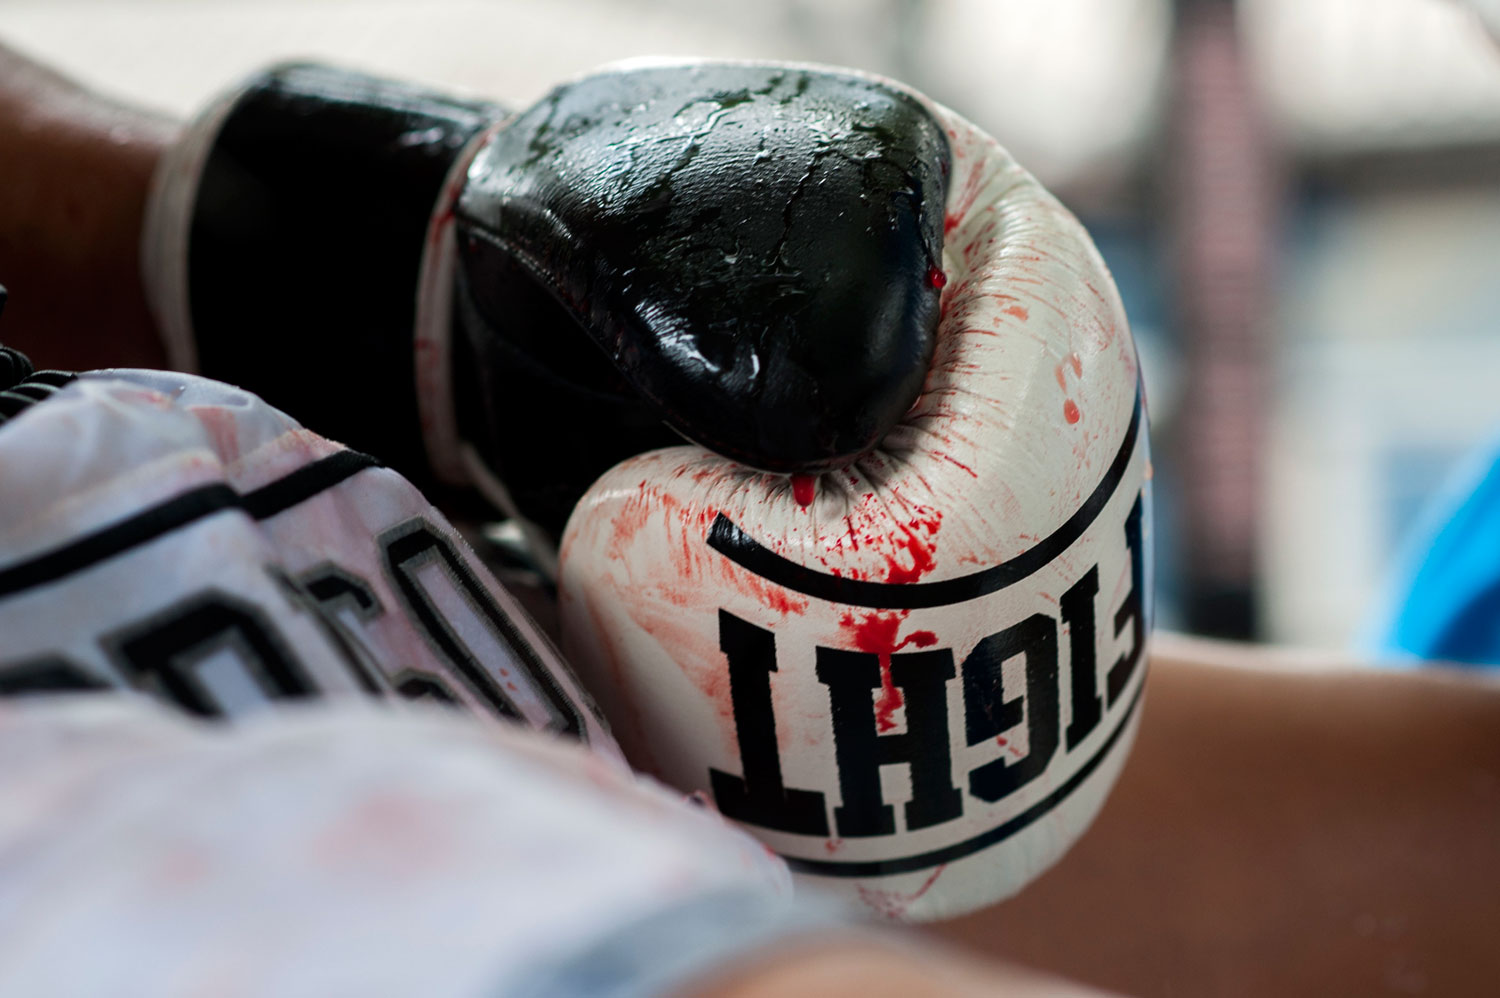 Detail of a bloody boxing glove as an inmate rests during a Muay Thai fight at Klong Pai prison on July 12, 2014 in Nakhon Ratchasima, Thailand.